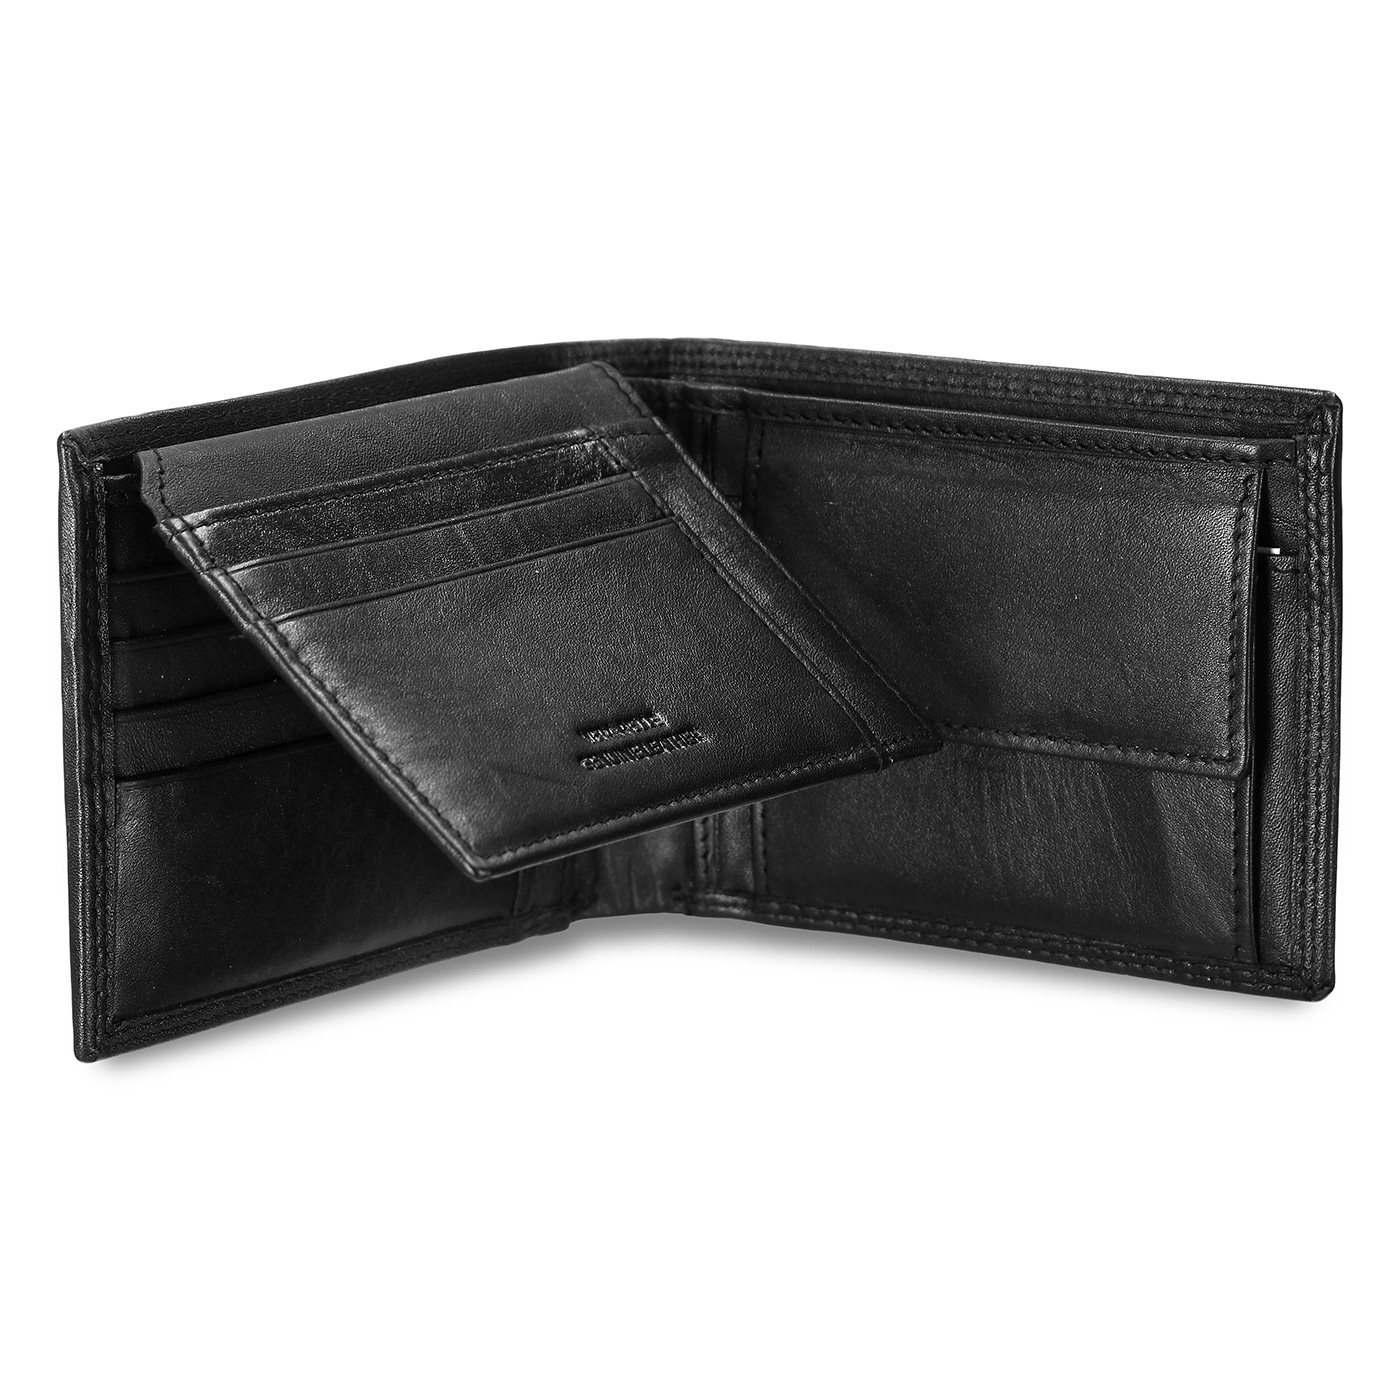 Image IM LOGO AND LETTERING LEATHER WALLET - 2 